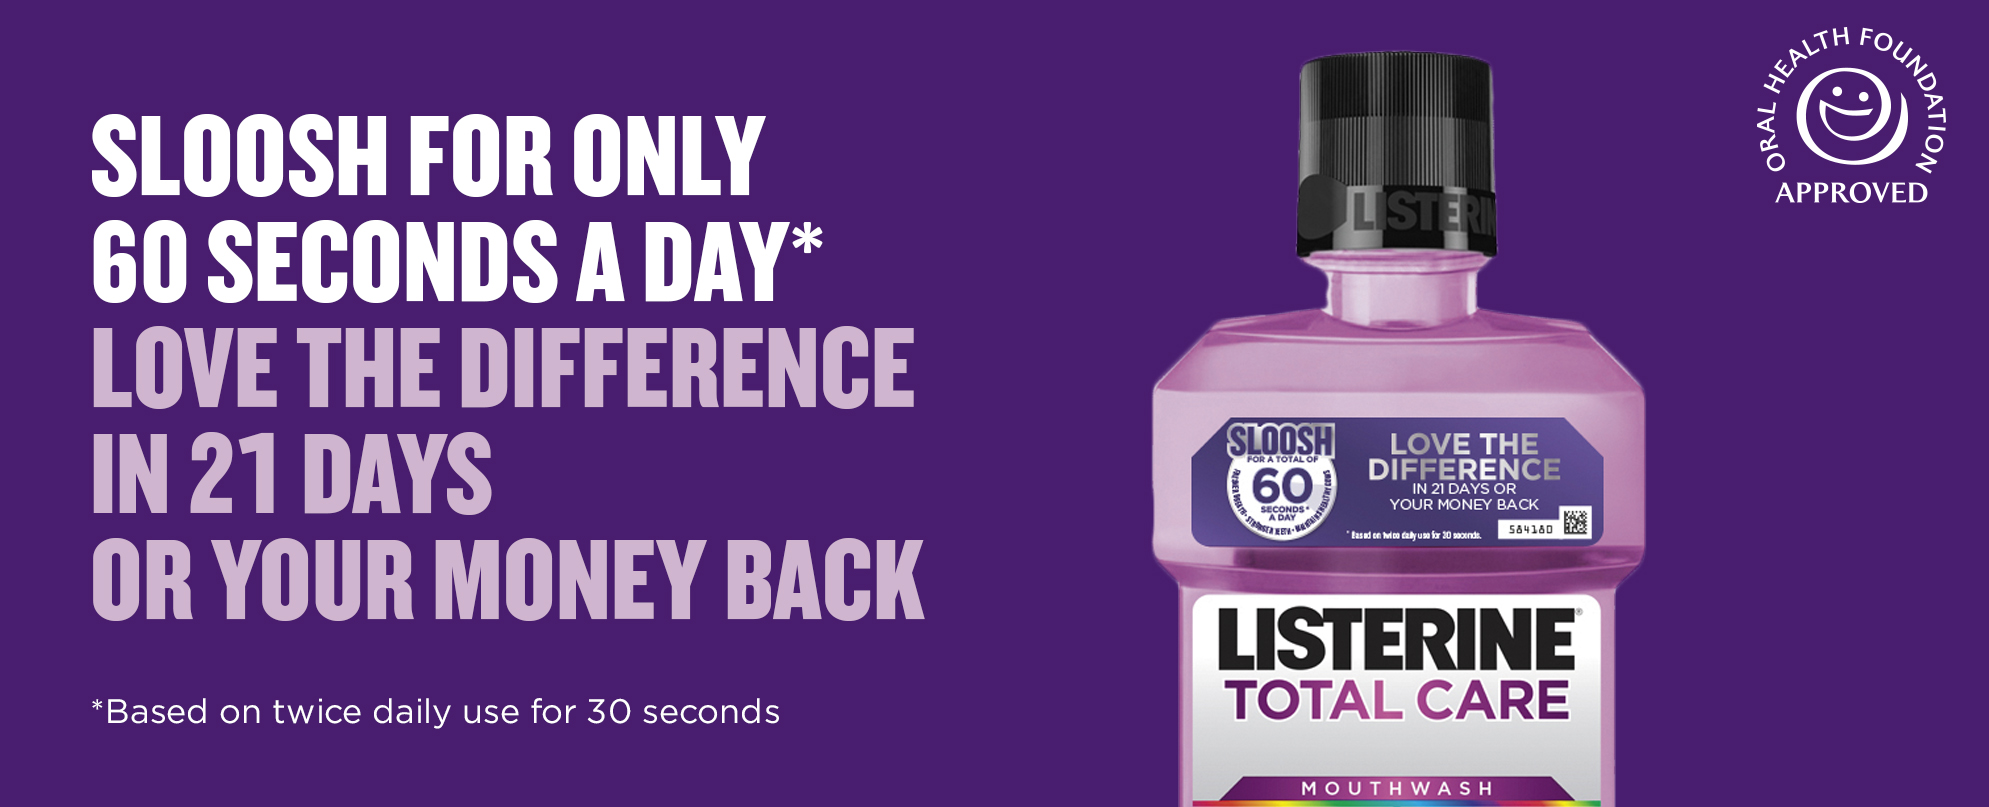 Sloosh Twice a Day Total Care Mouthwash - 21 Day Guarantee - LISTERINE®